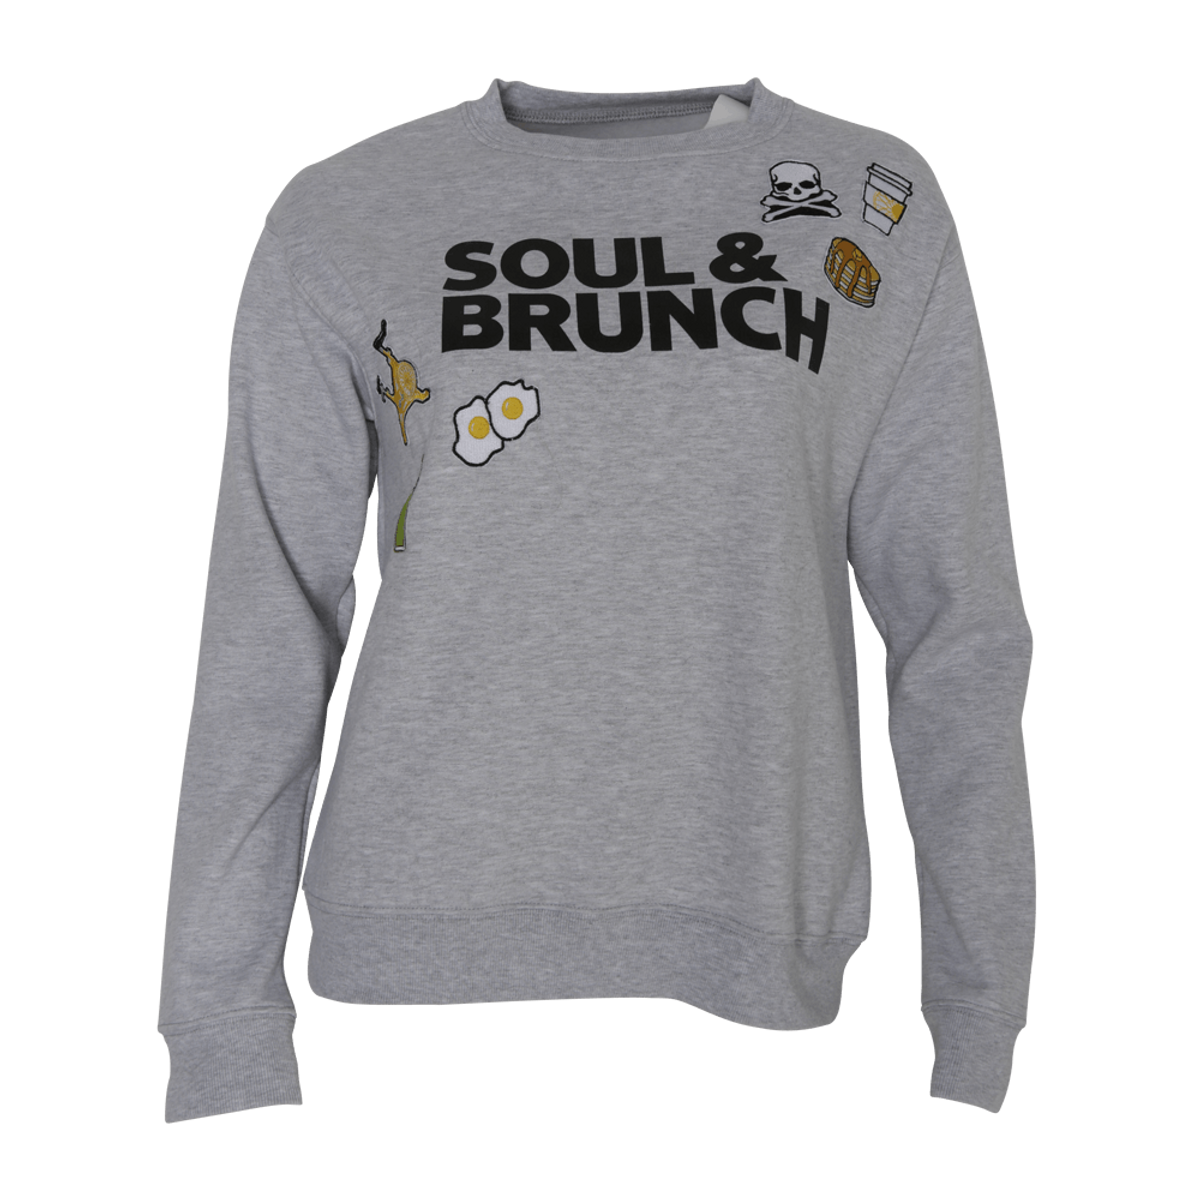 SoulCycle Just Released a New Apparel Collection for Valentine’s Day